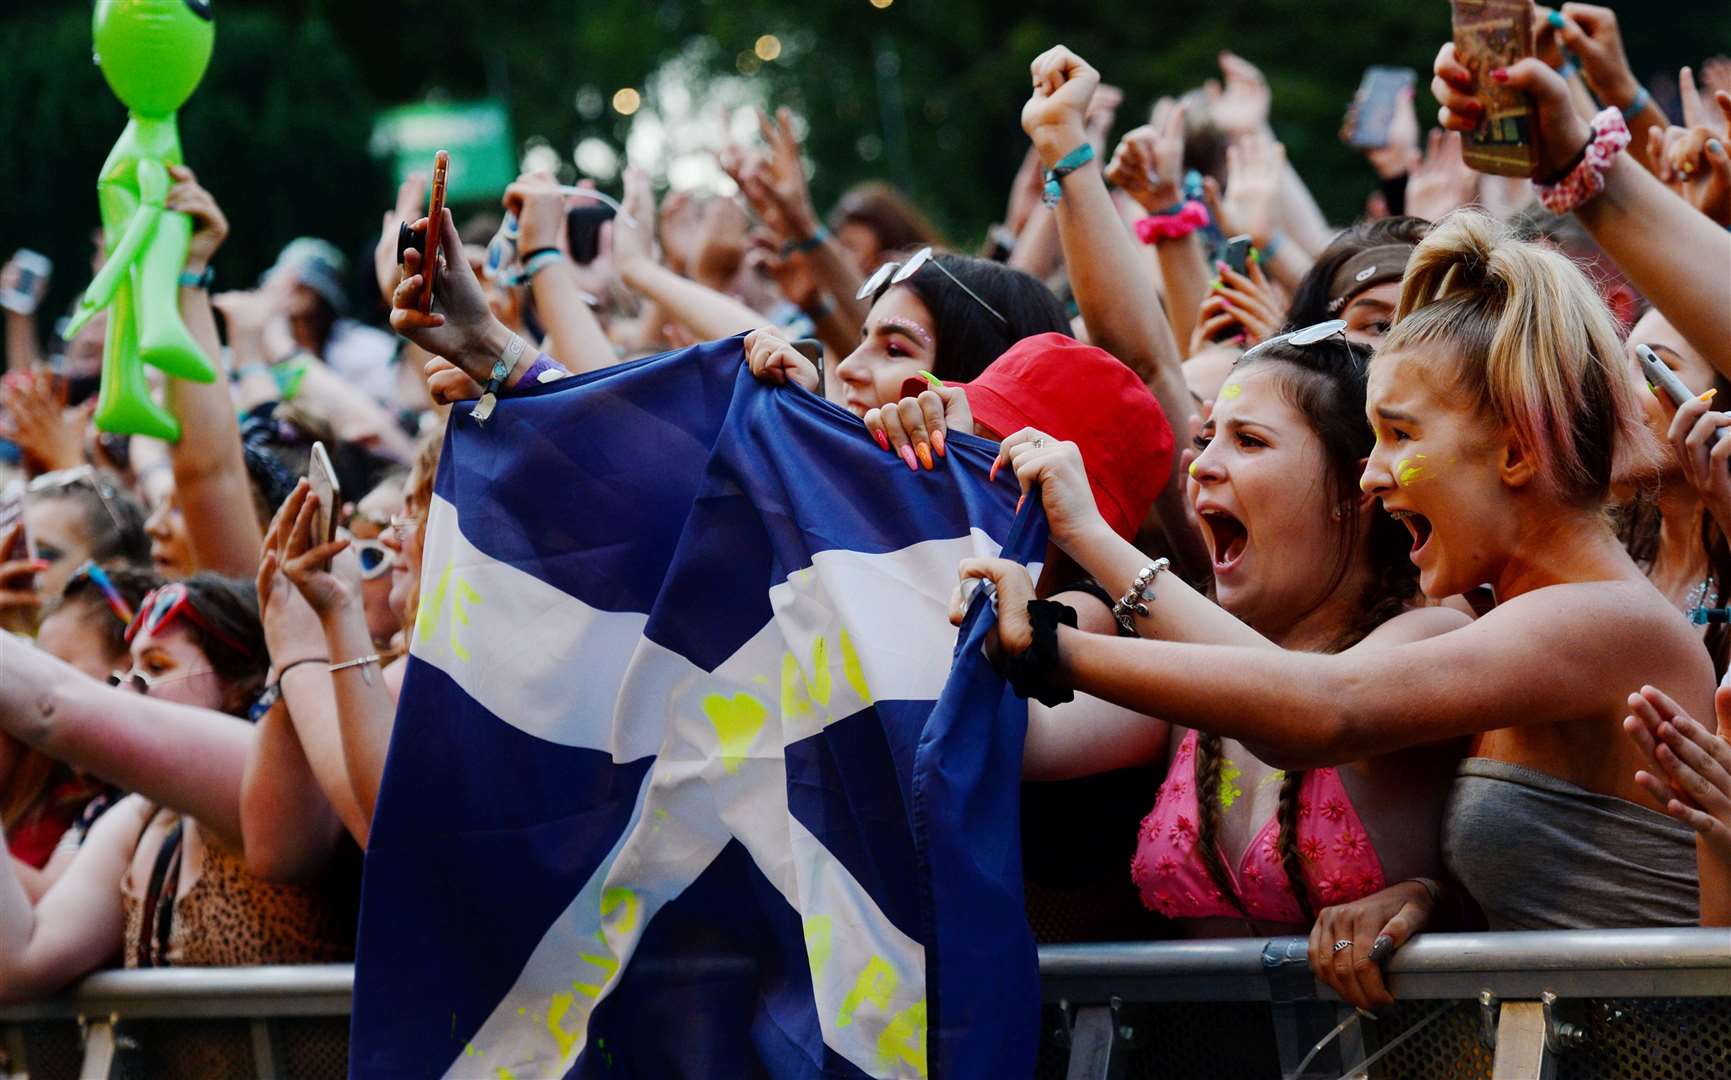 Belladrum 2019. Crowds go wild for Lewis Capaldi. Picture: Gary Anthony. Image No.044555.